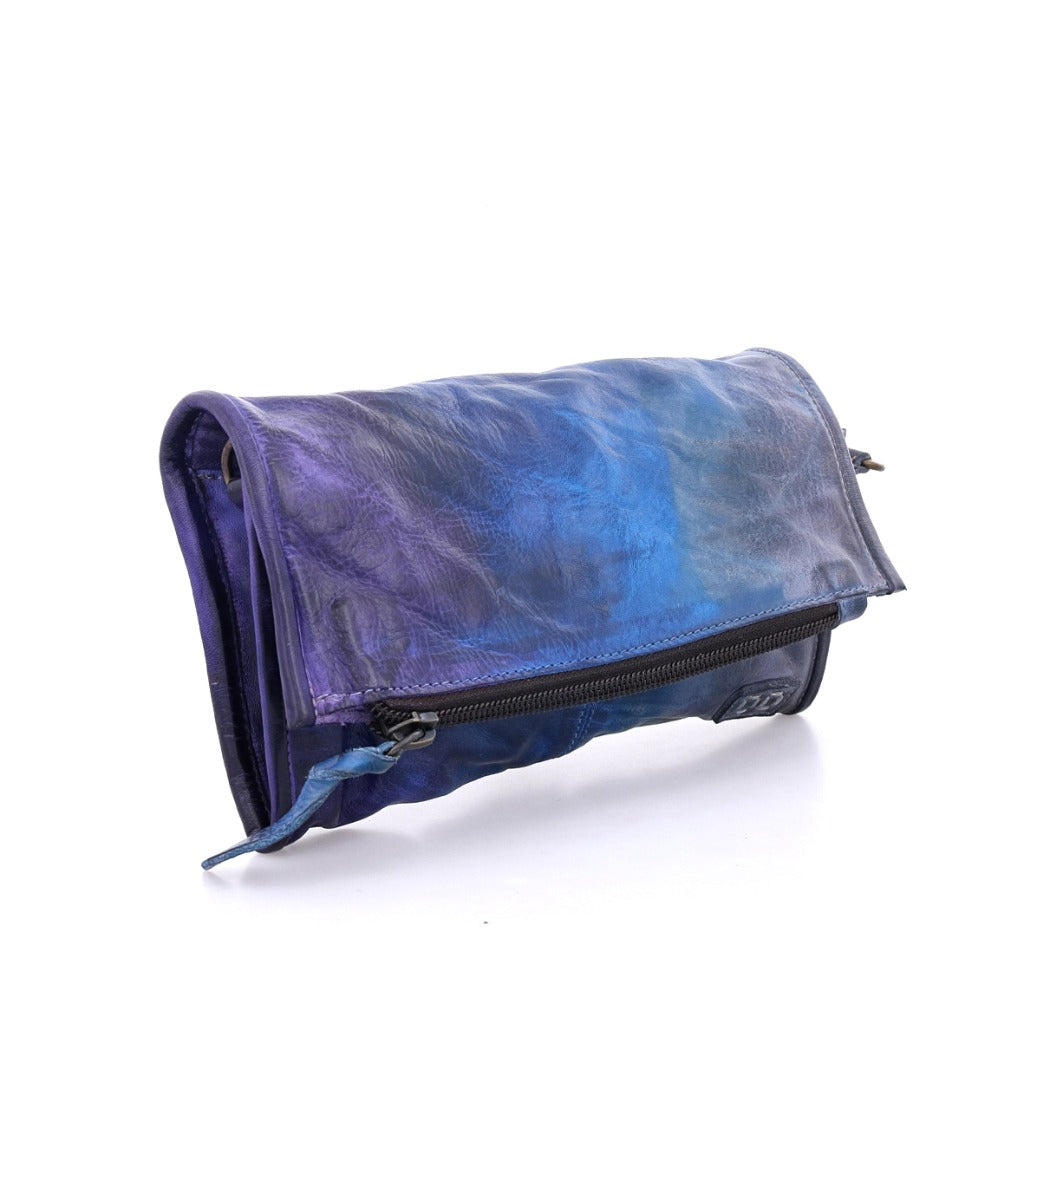 A purple and blue leather Amina clutch bag from Bed Stu.